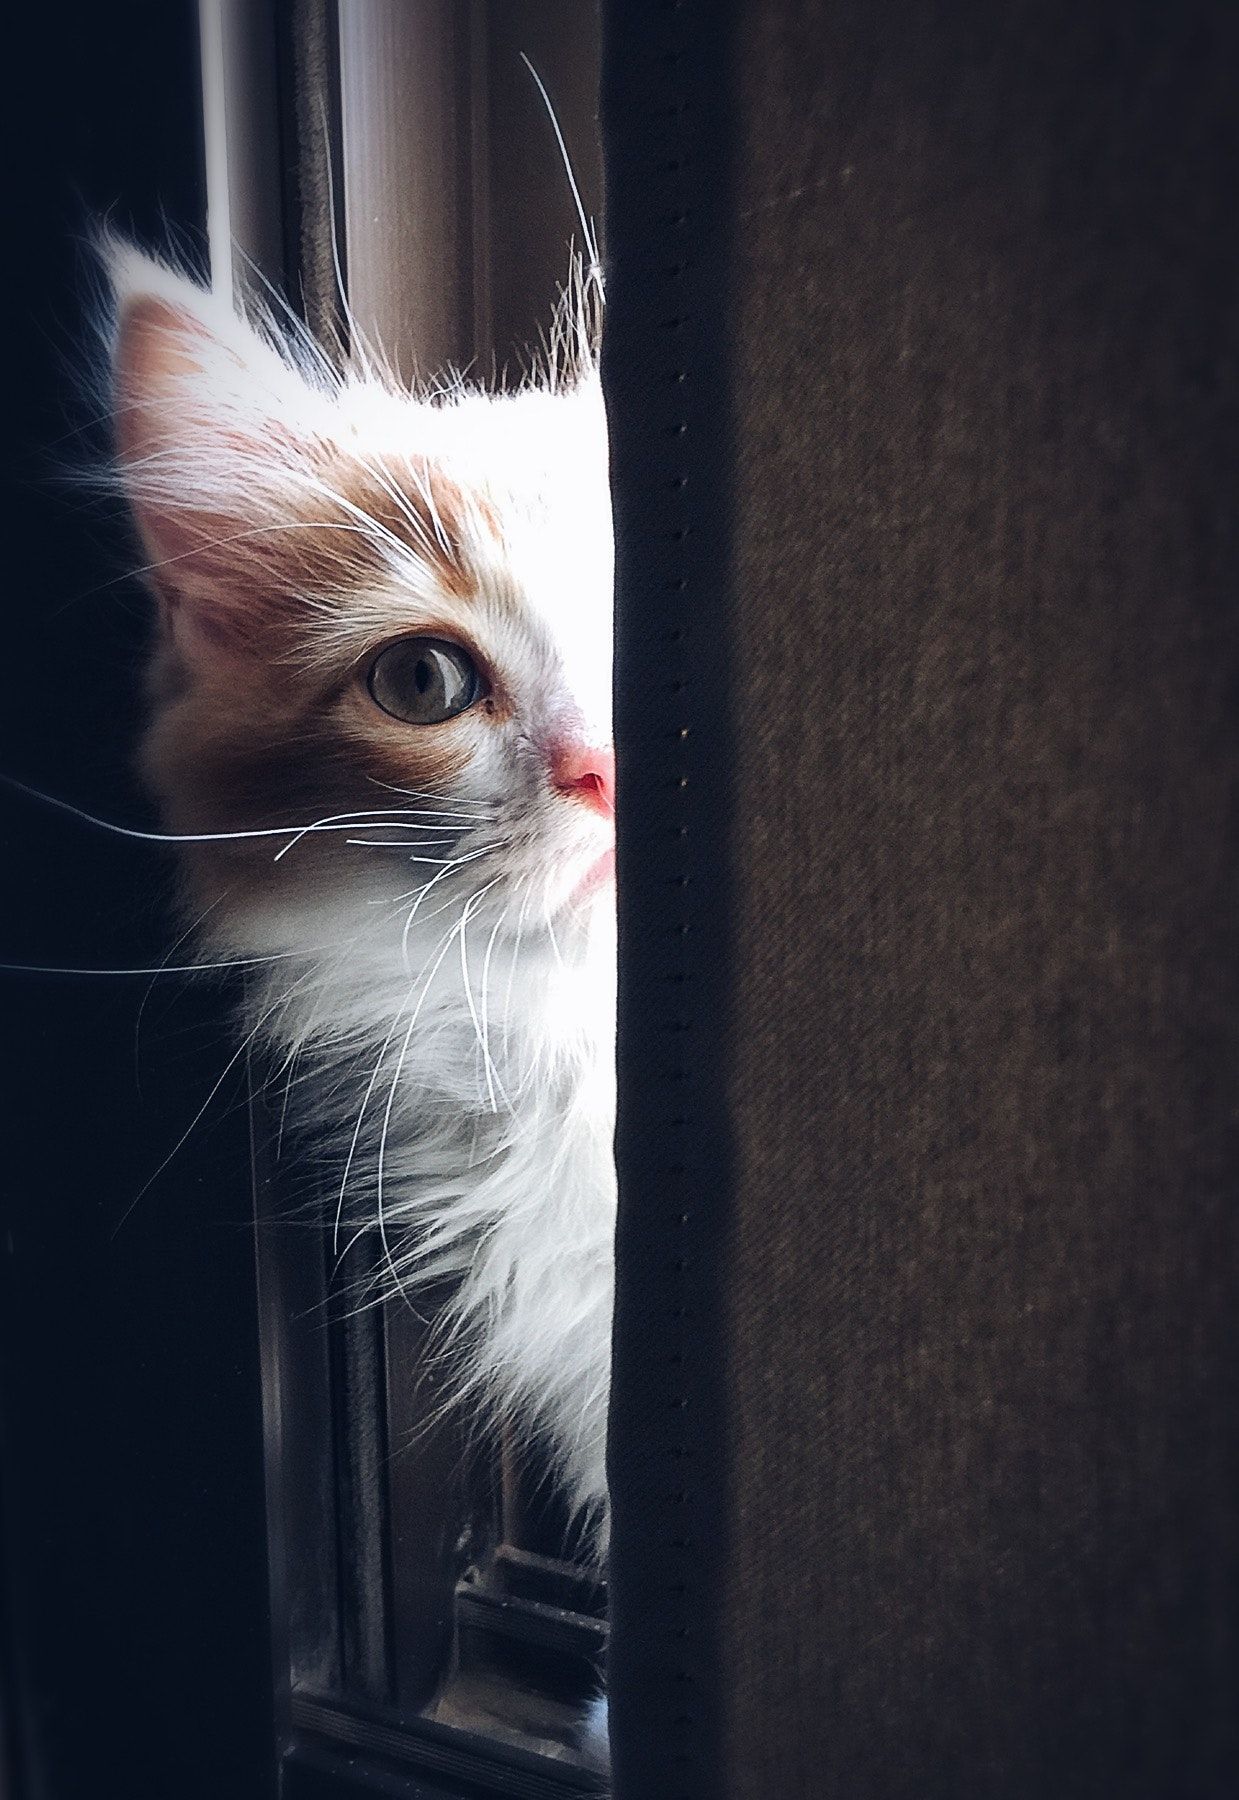 A white and orange kitten peeks out from behind a curtain. - Cat